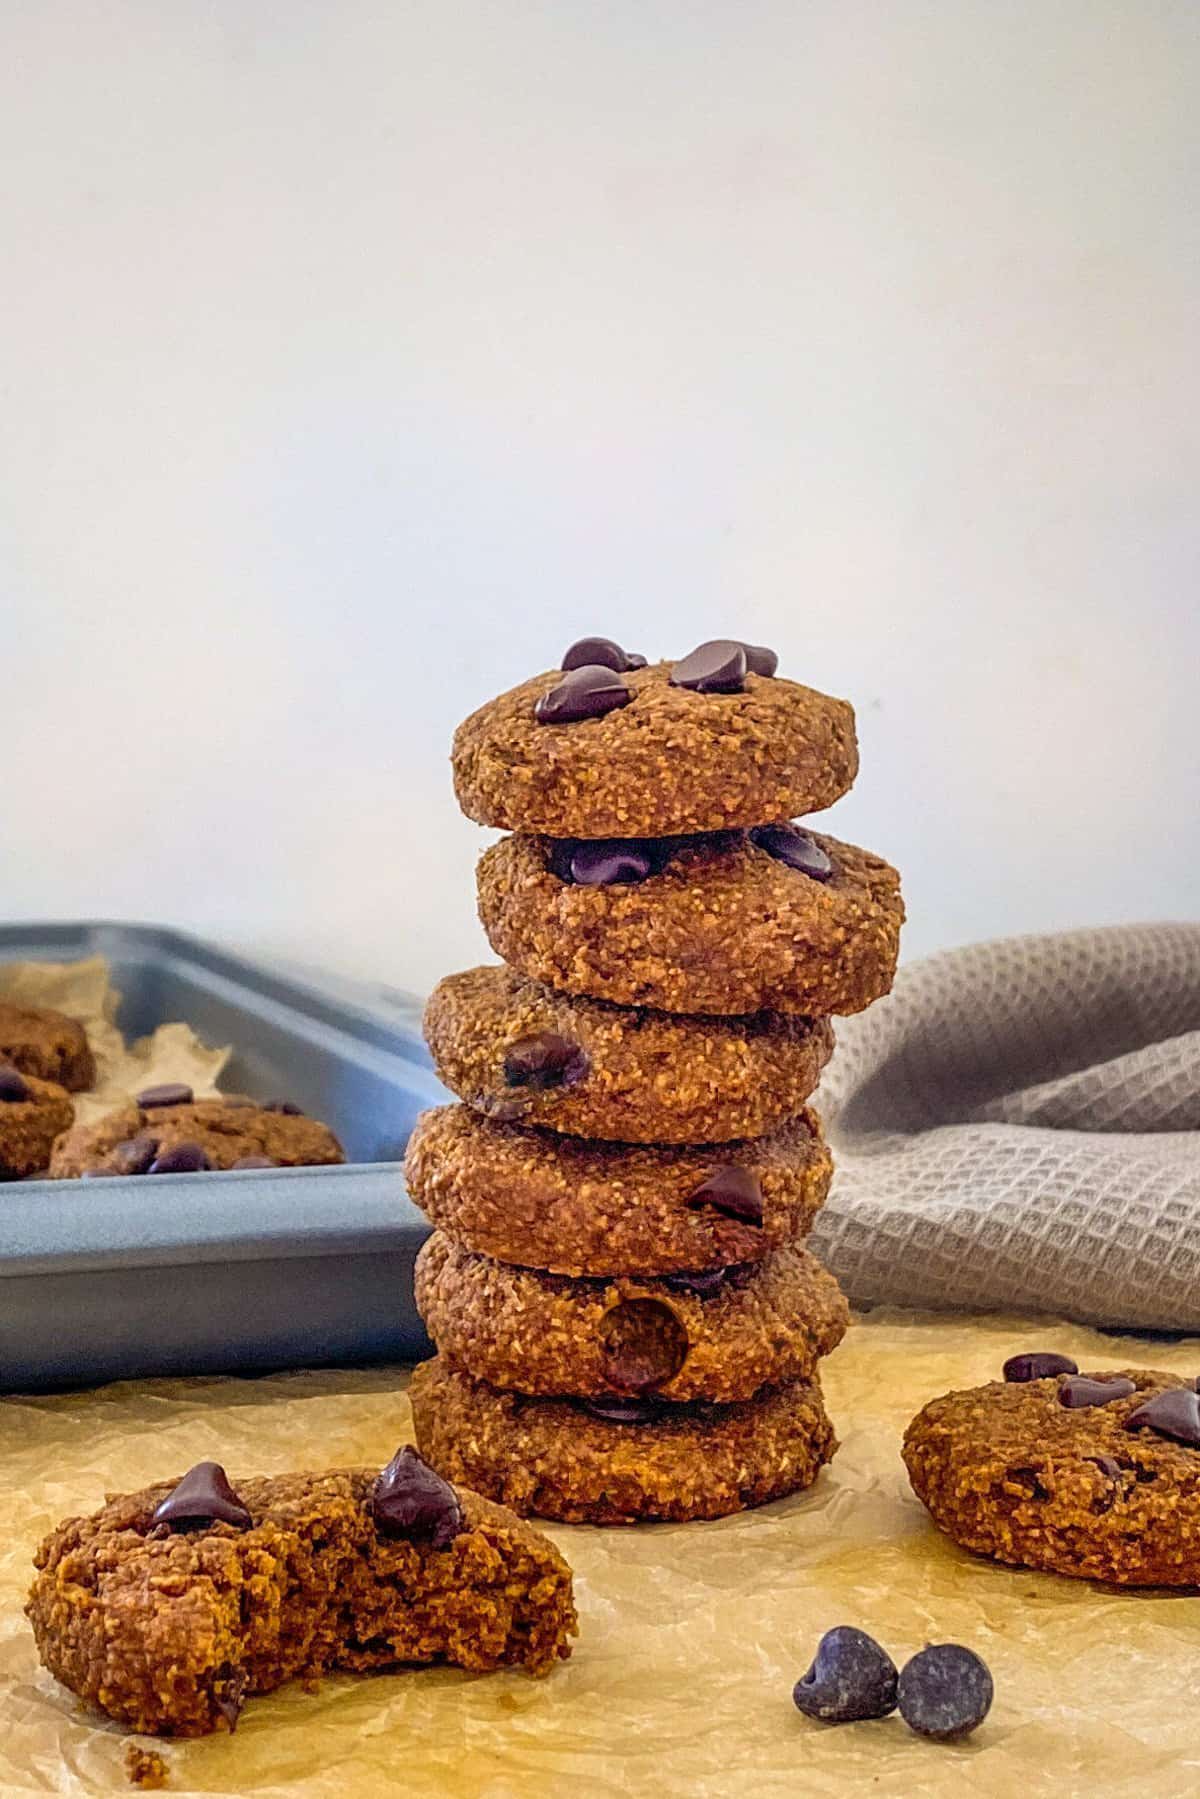 Stack of chocolate chip cookies with tray of more cookies in background.